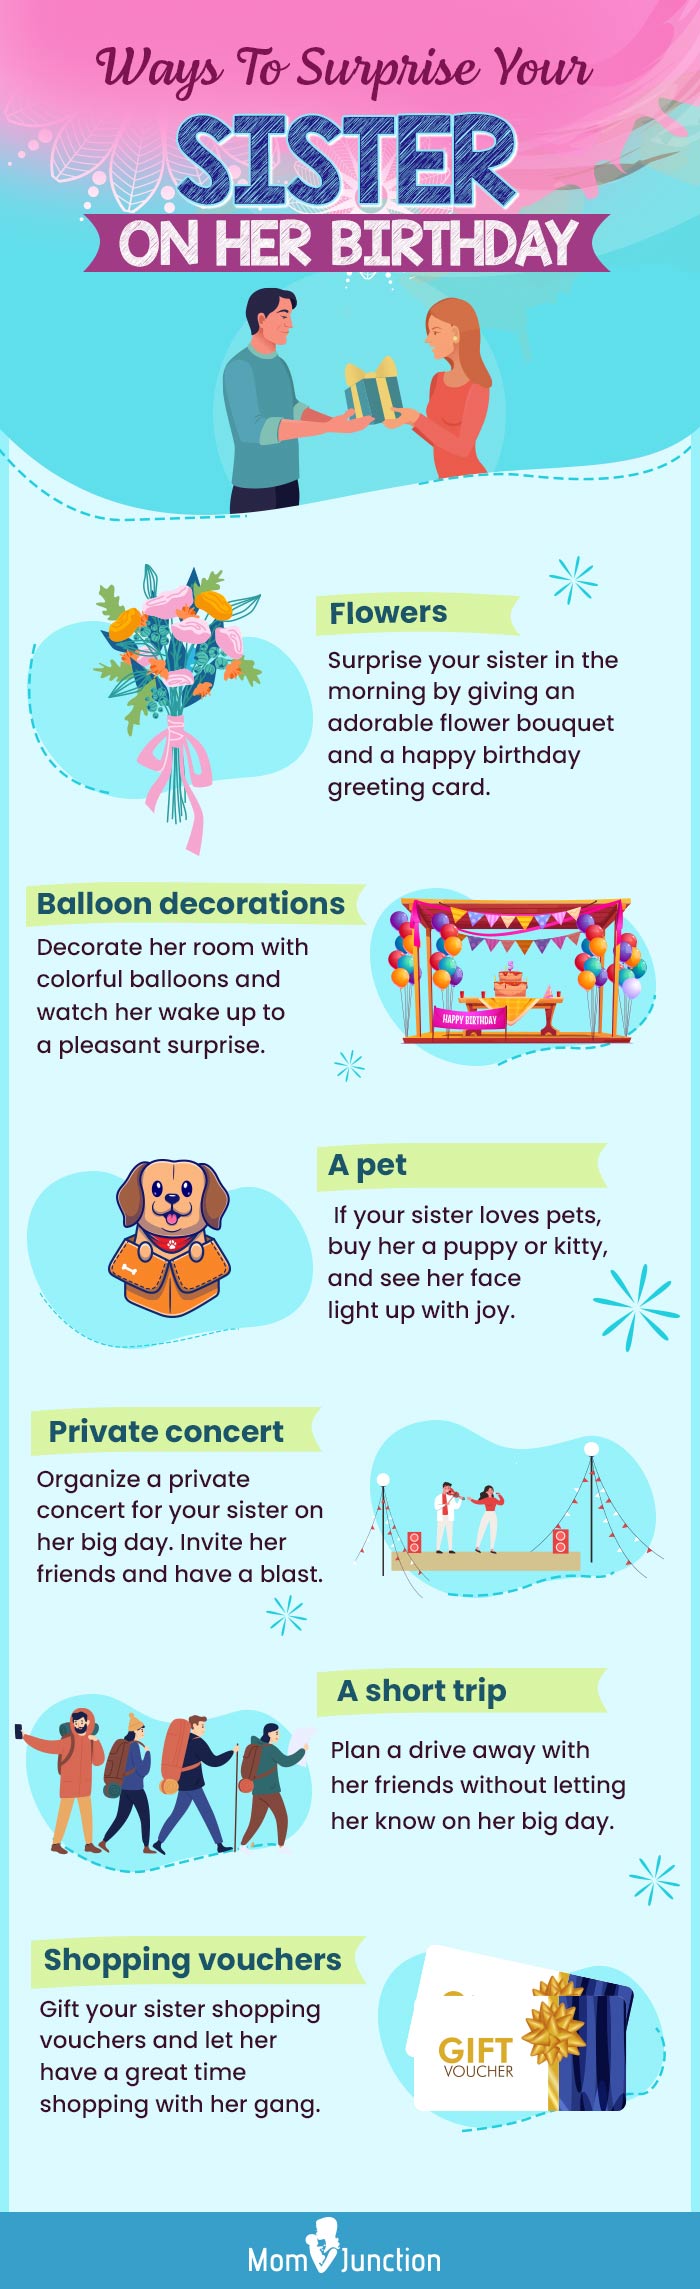 birthday surprises for sister [infographic]